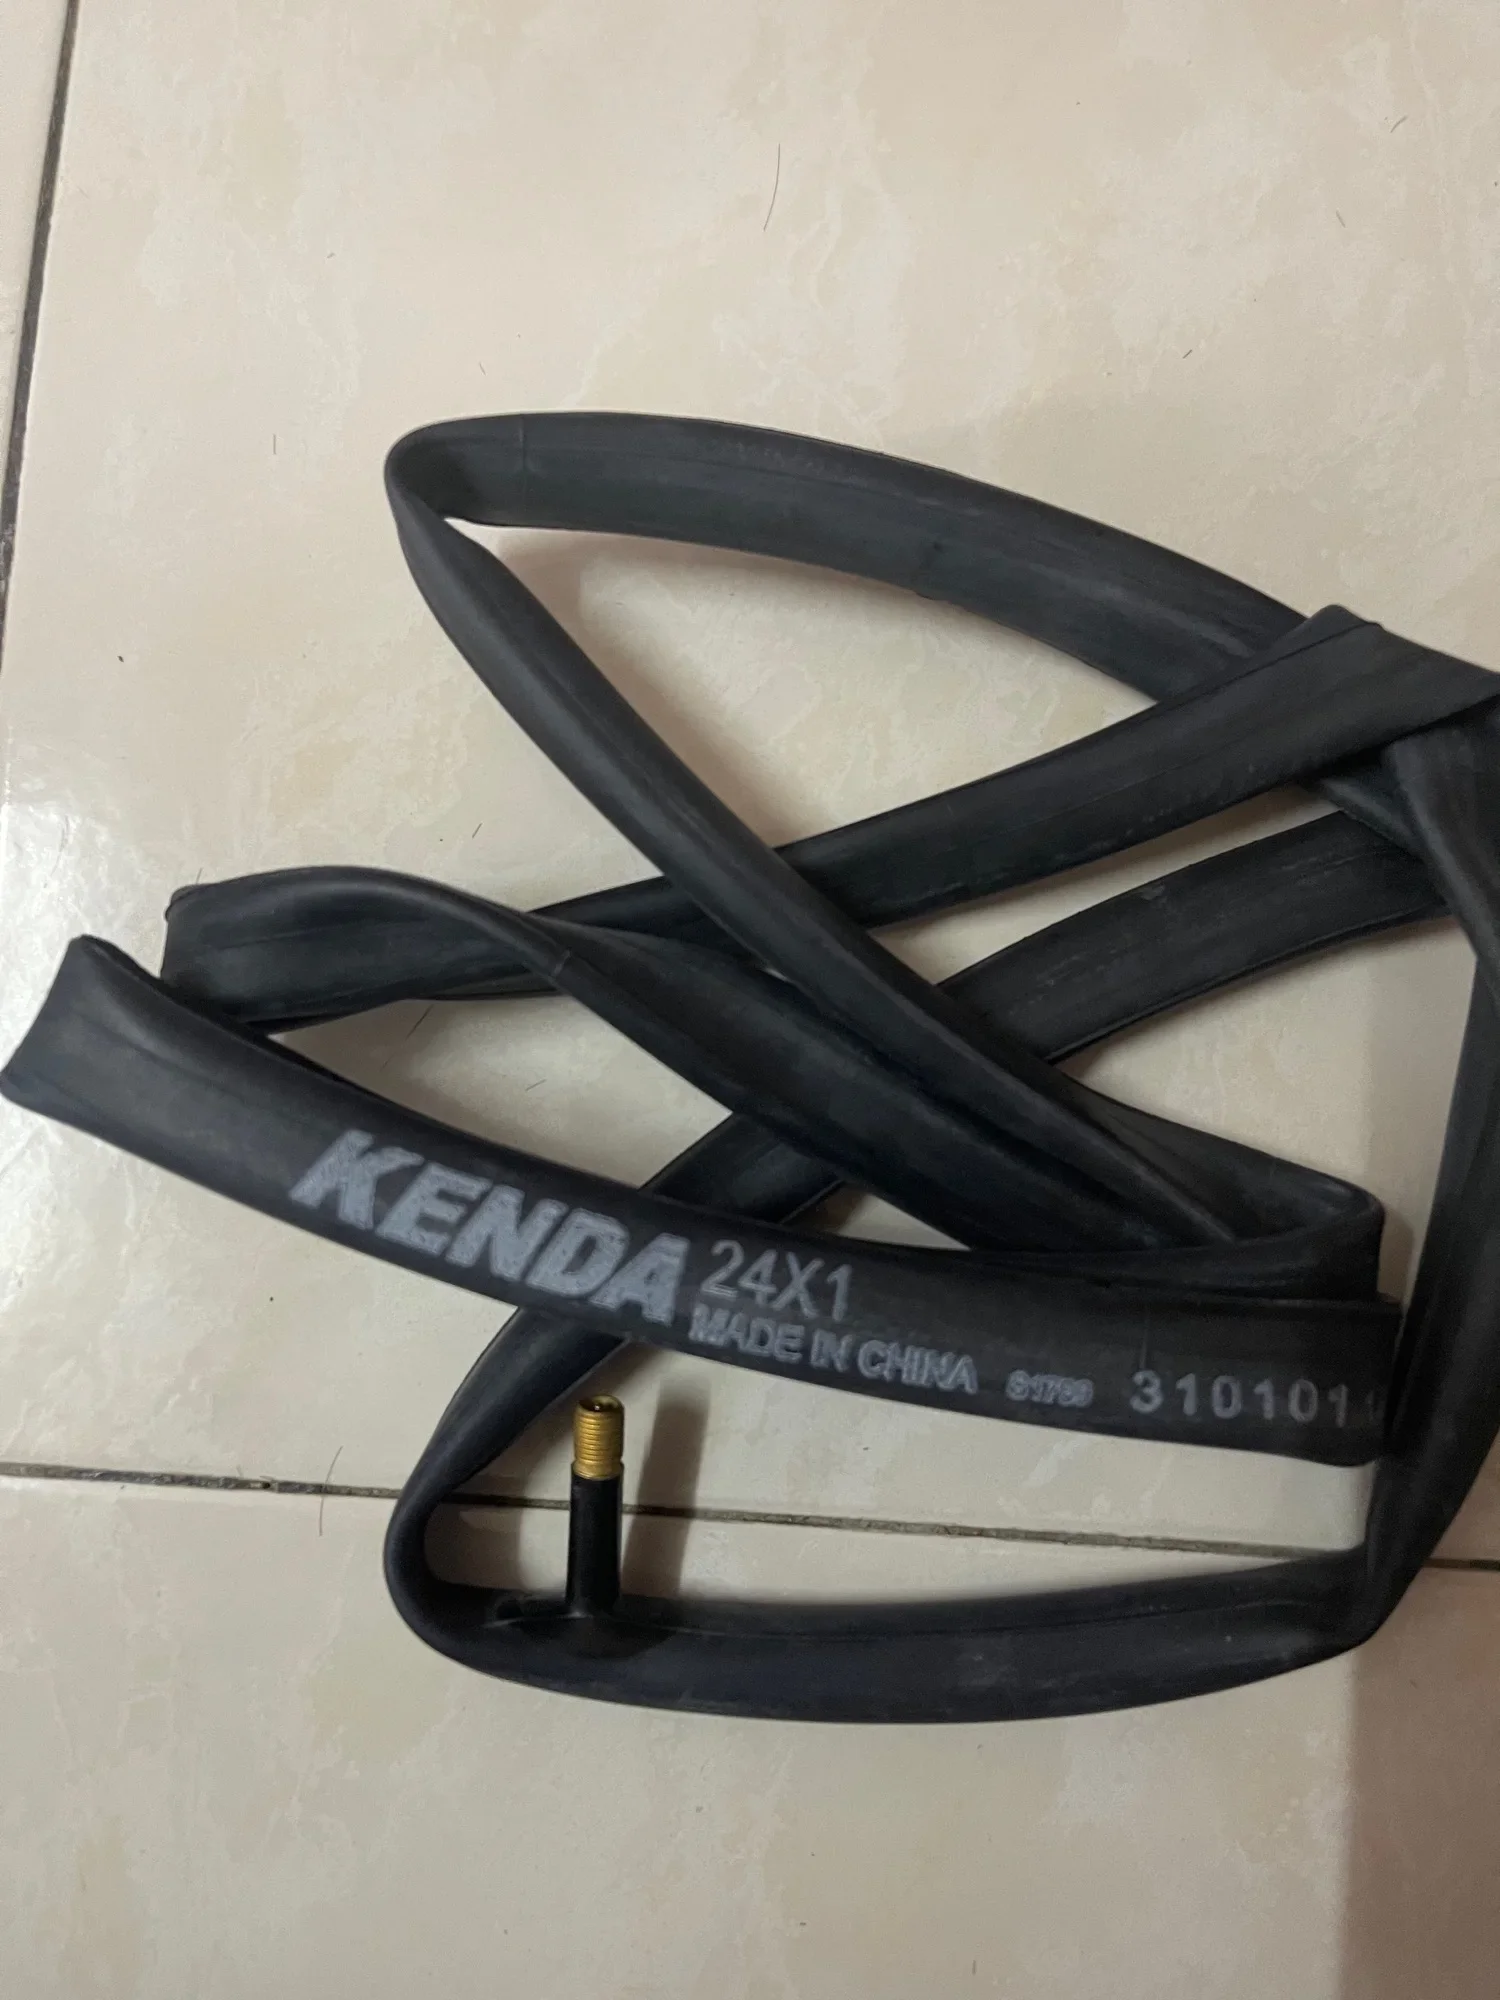 Kenda wheelchair tire/Tyre tube only (1 pc )